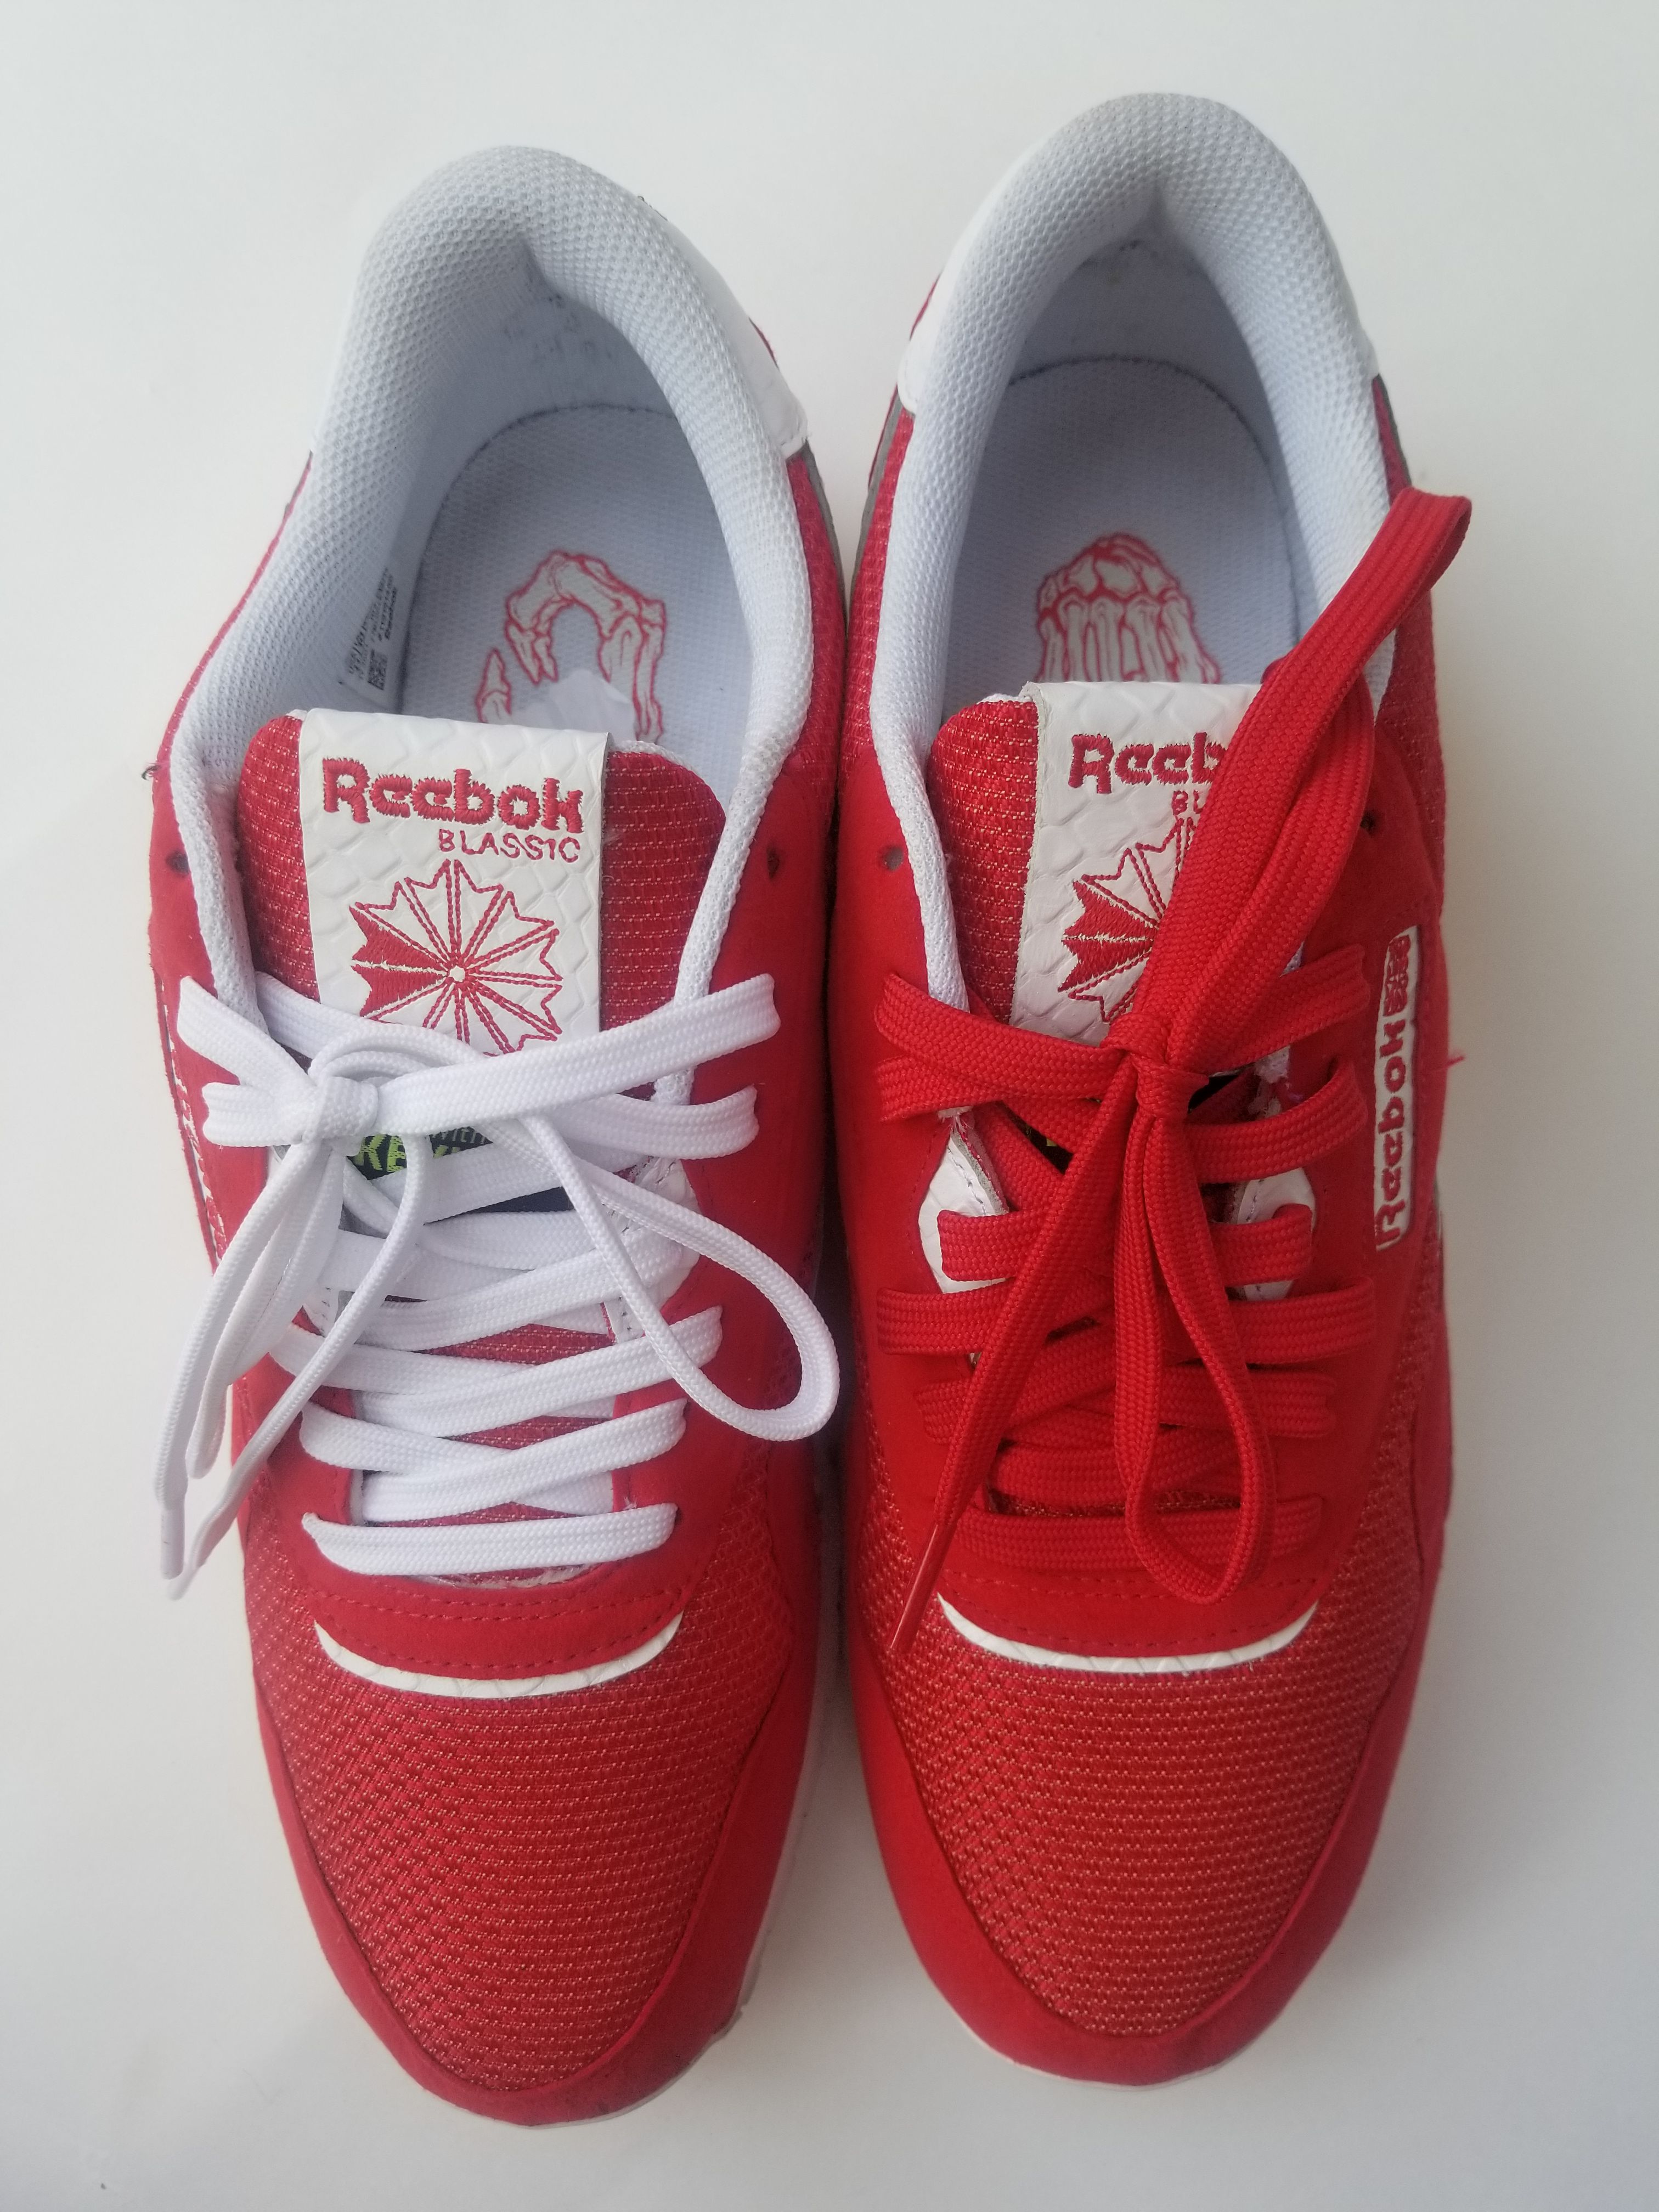 Reebok 4Hunnid 400 Bait x YG Classic Nylon Red Blassik Men's Shoes Size 11 Sale in Los Angeles, CA - OfferUp